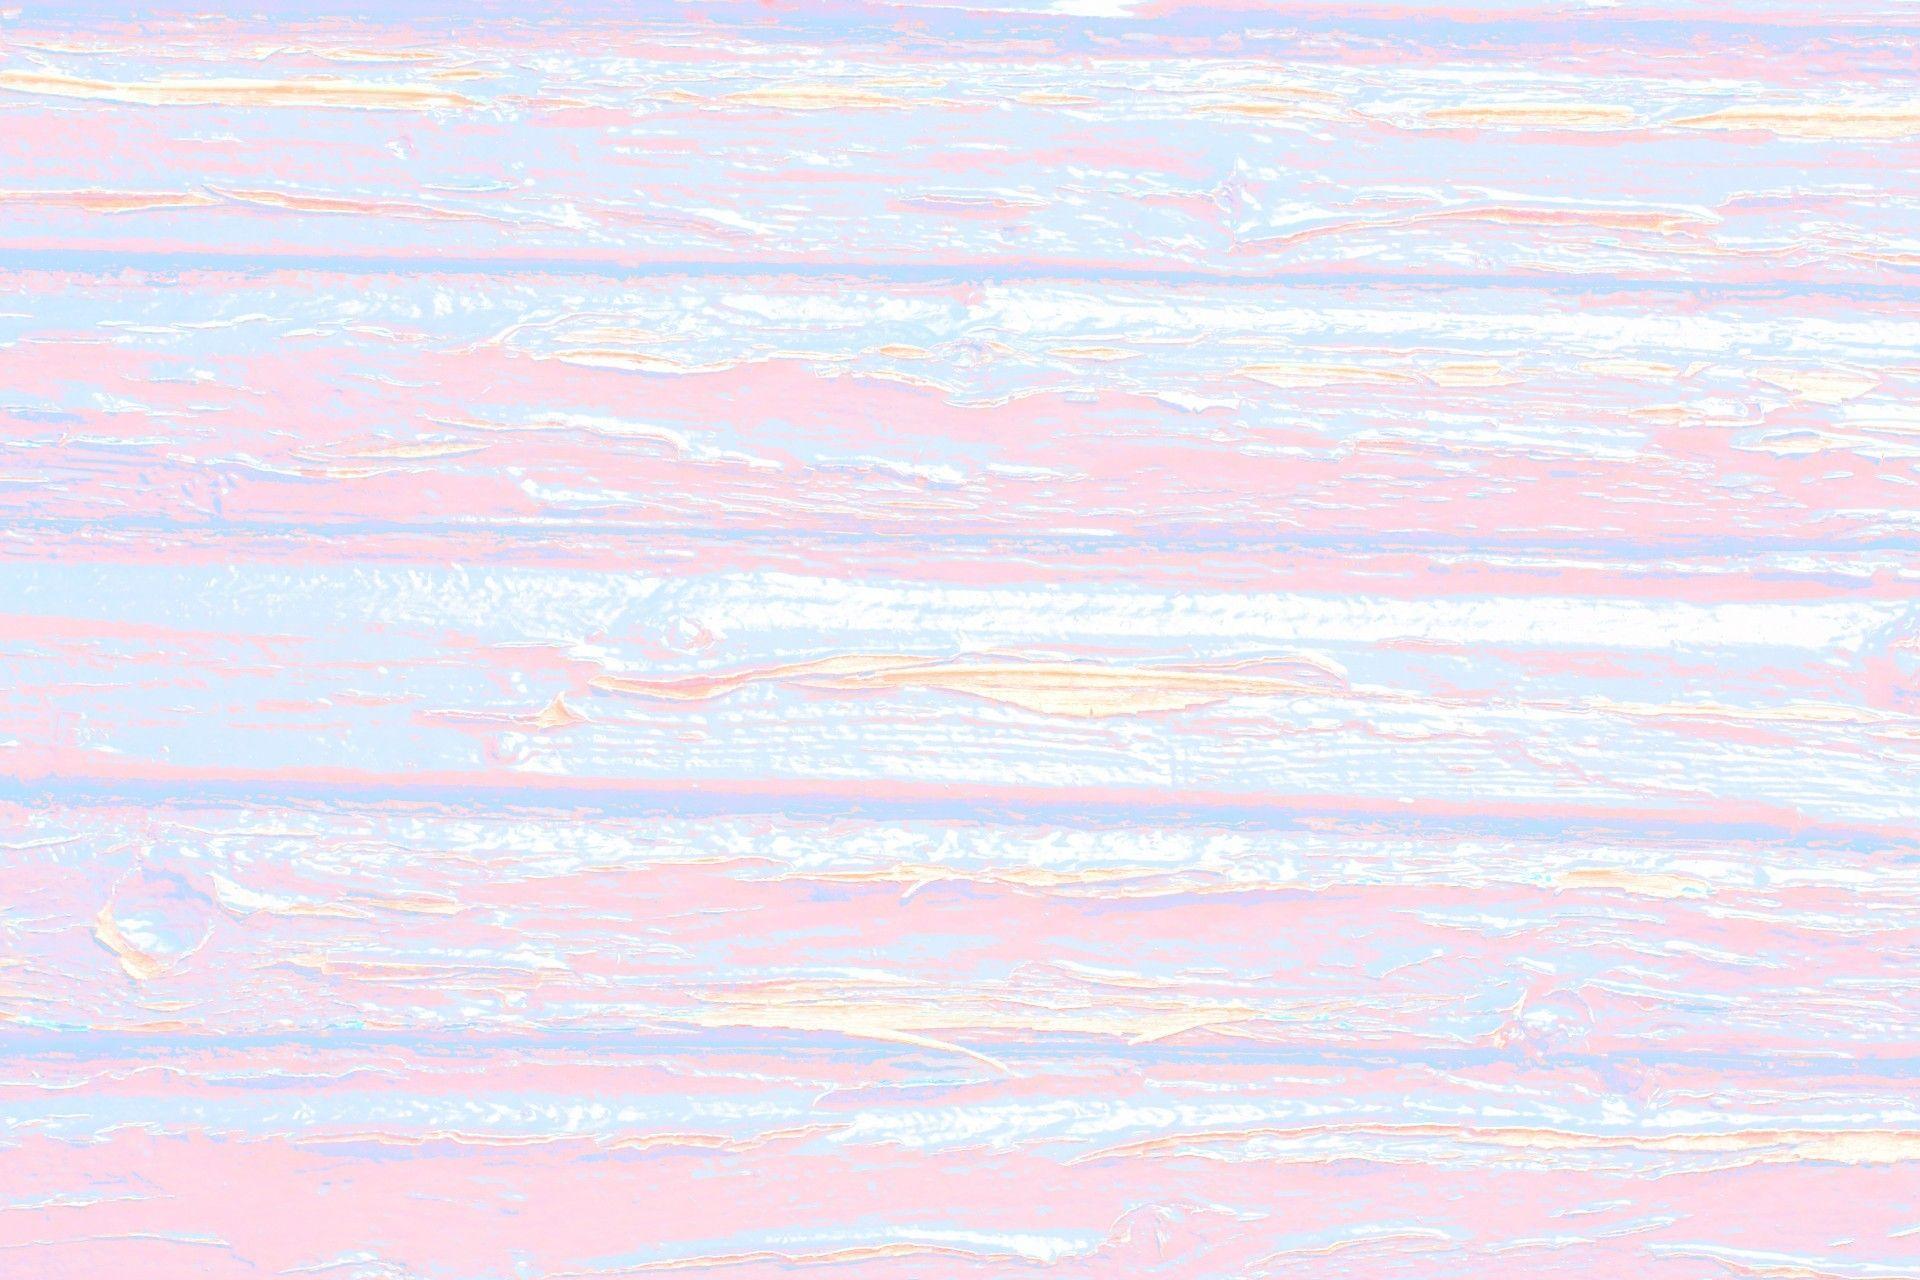  Pastels  Aesthetic  Computer Wallpapers  Top Free Pastels  